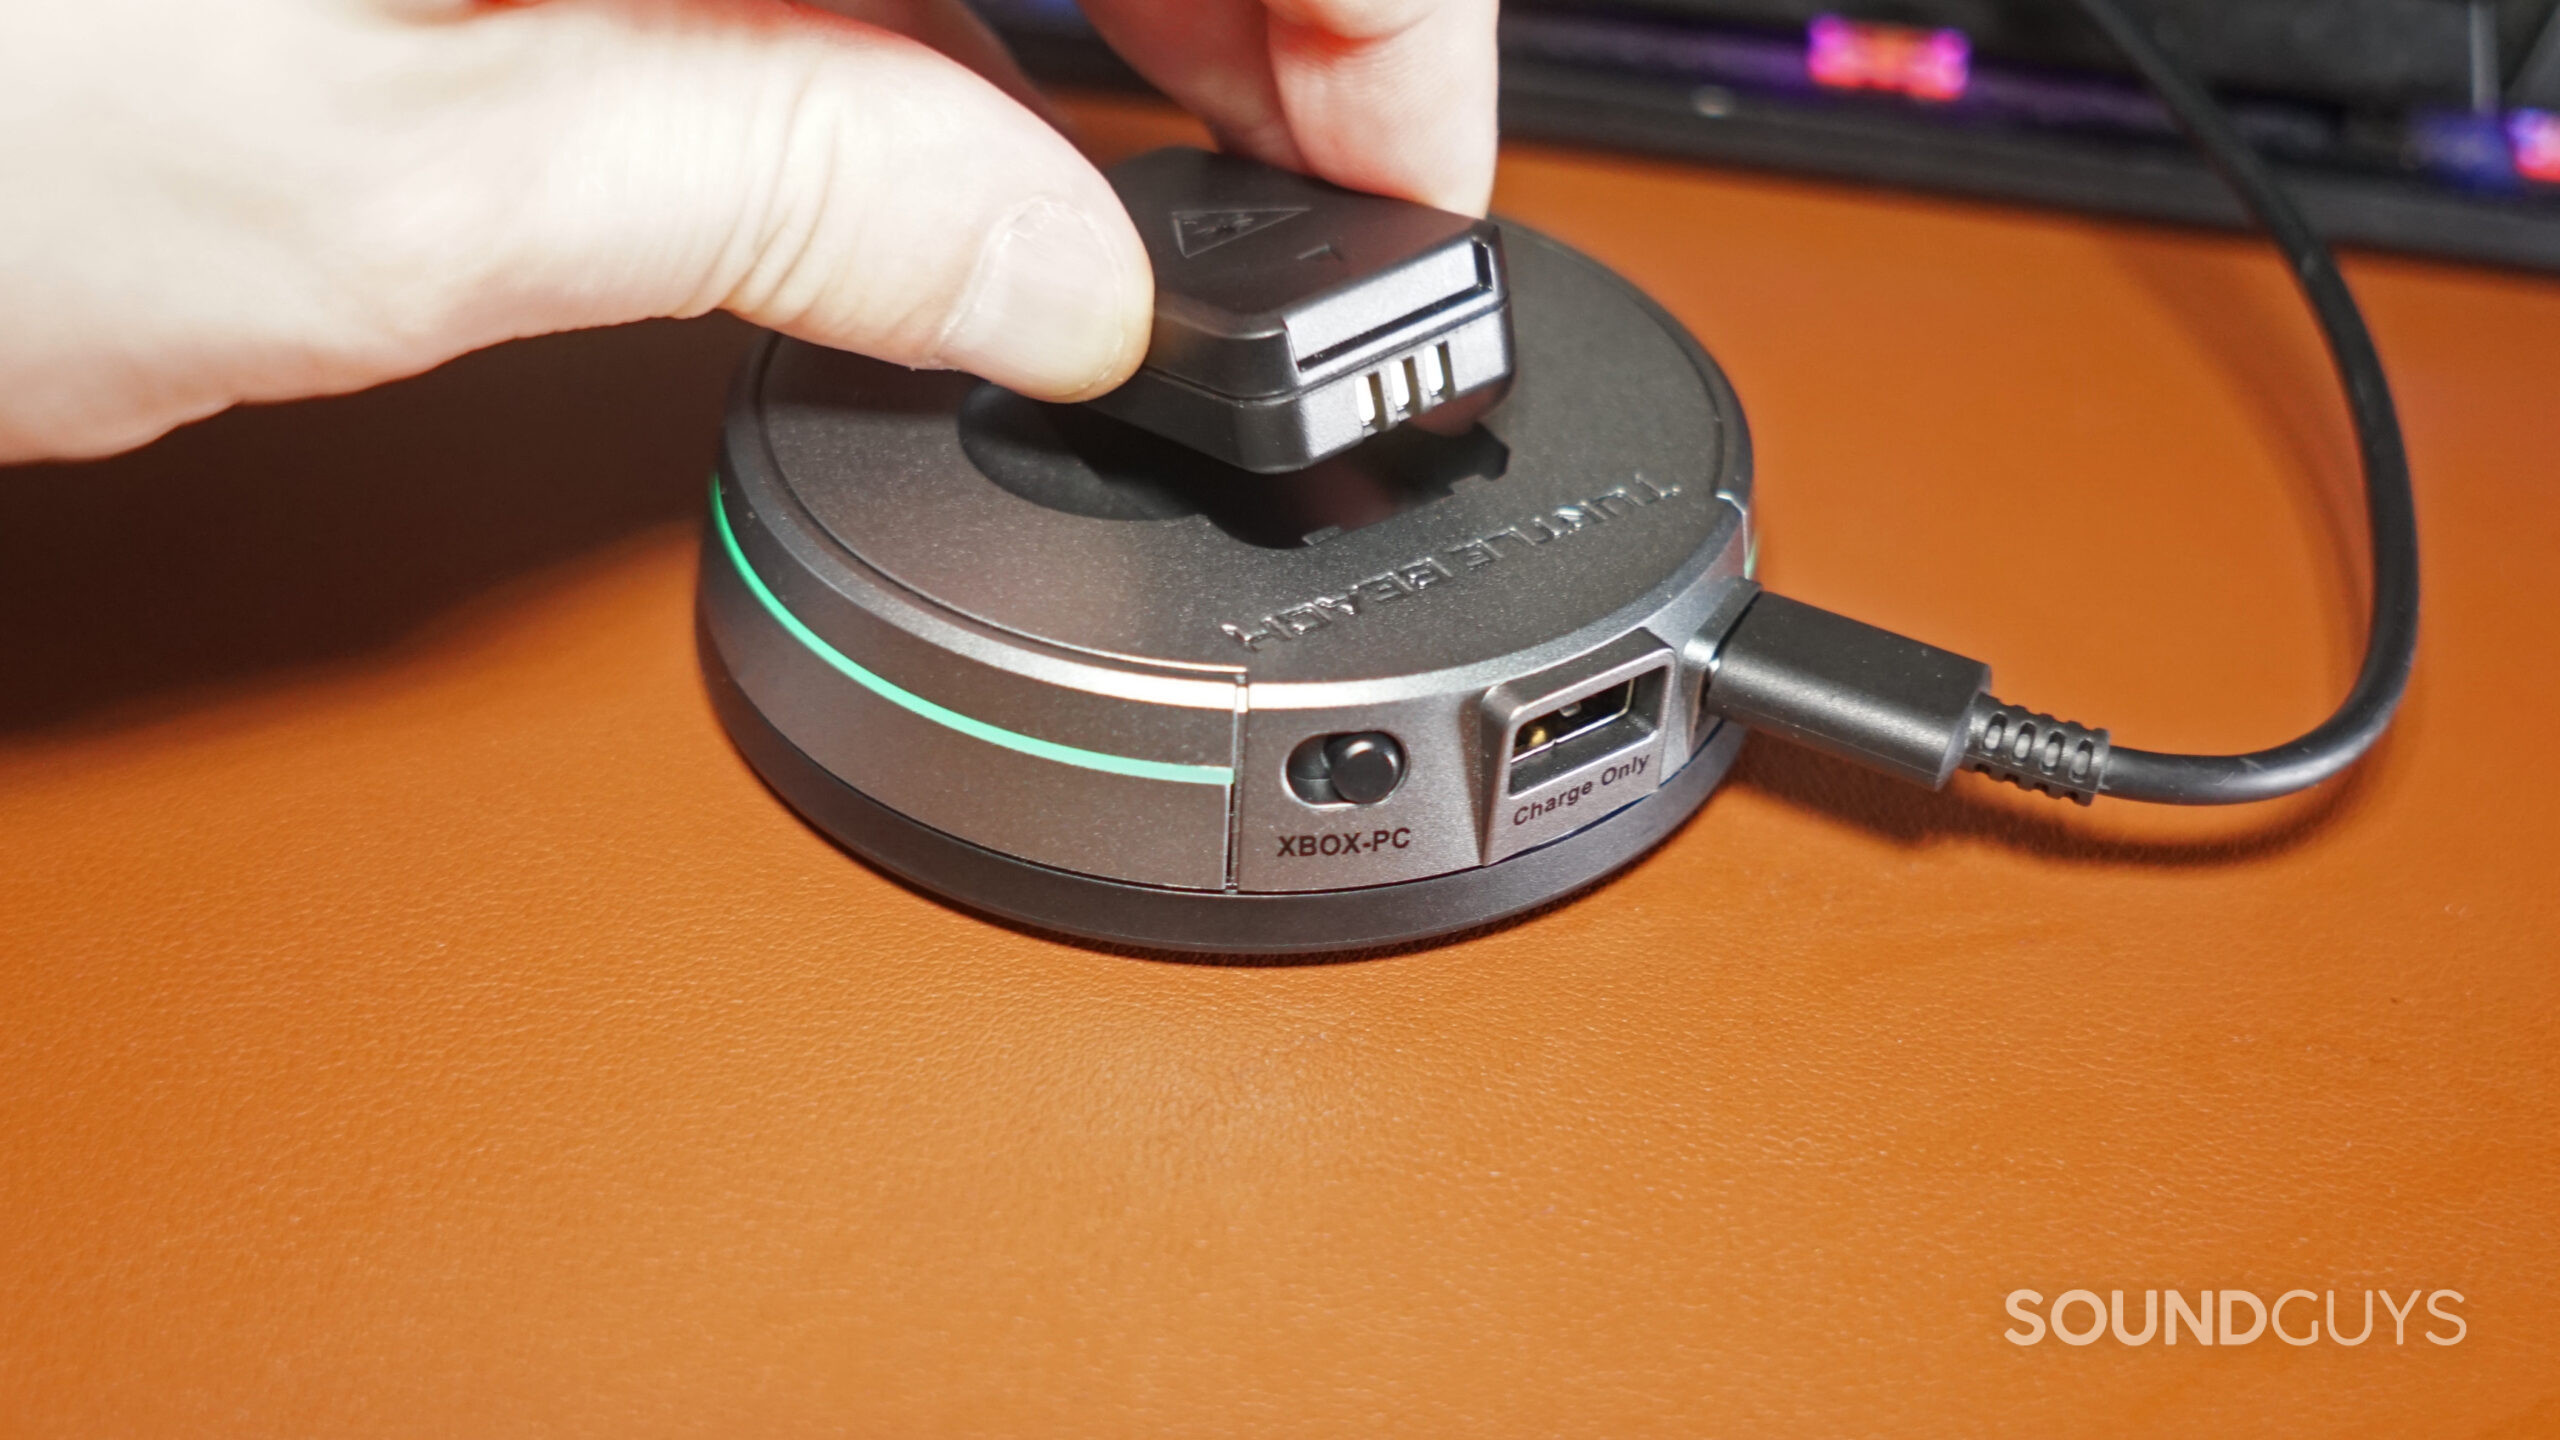 A close up shot of a hand putting the extra battery of the Turtle Beach Stealth Pro into its charging cradle.